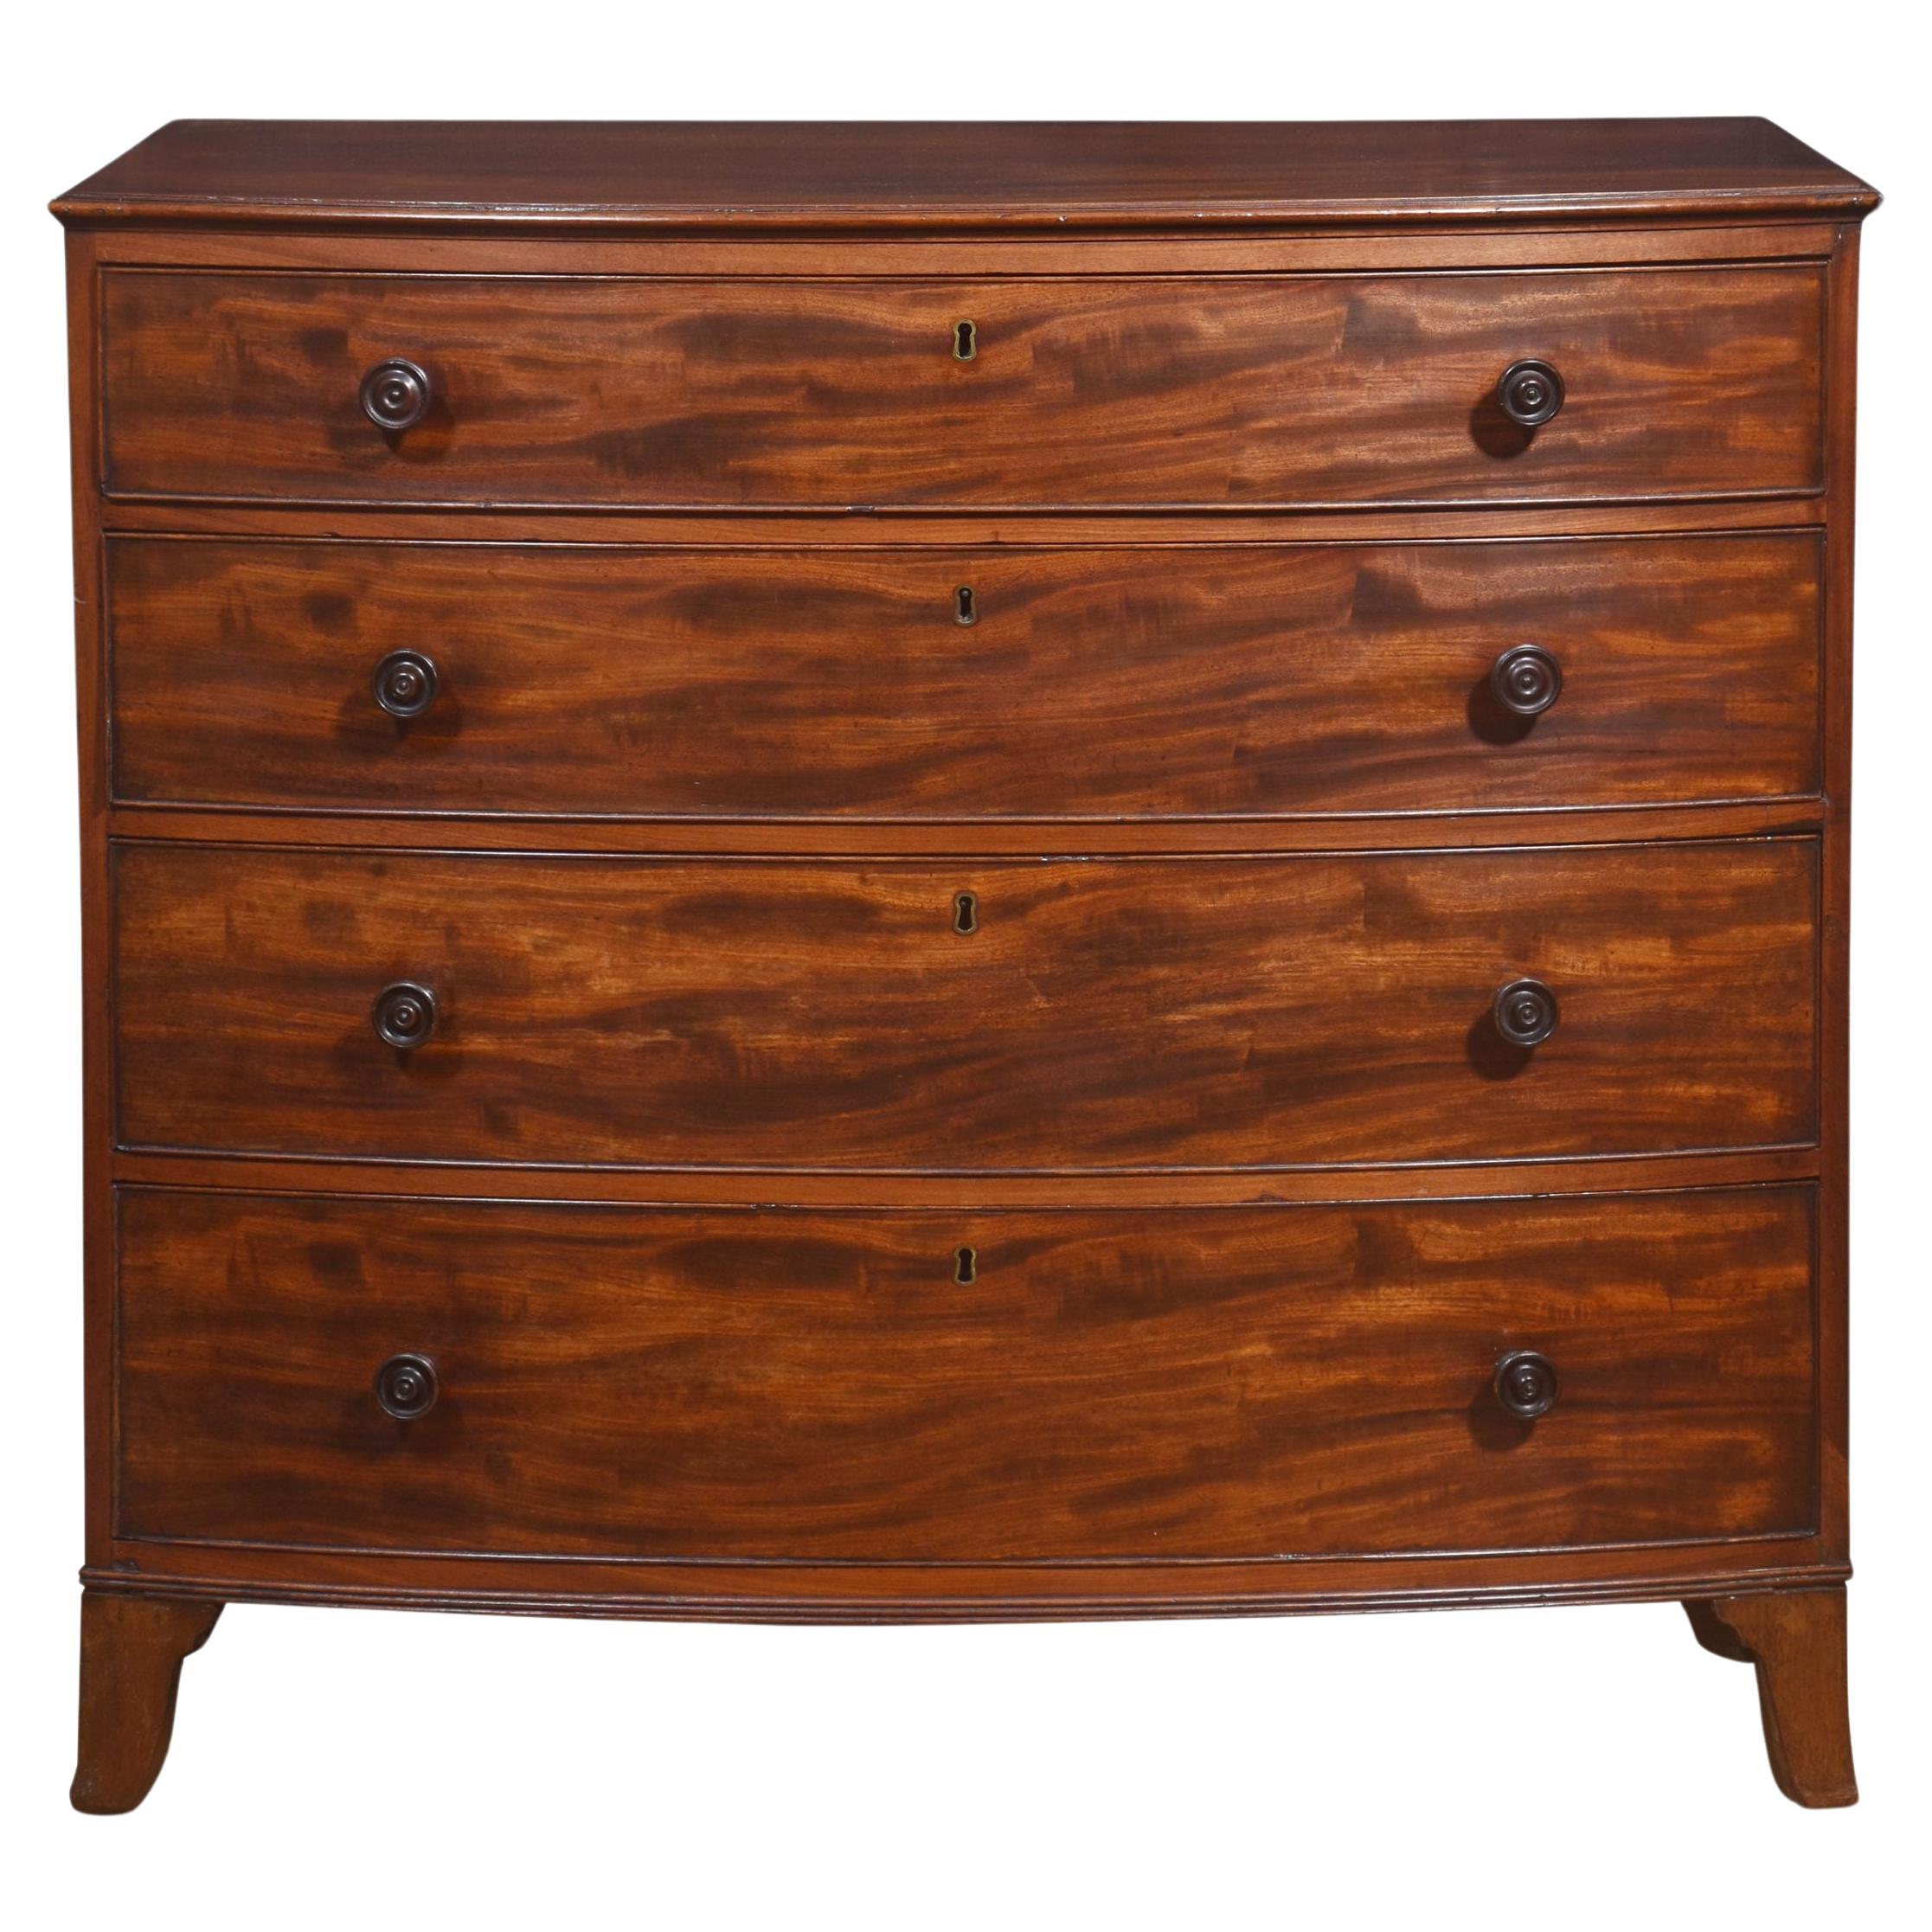 Regency mahogany bow front chest of drawers